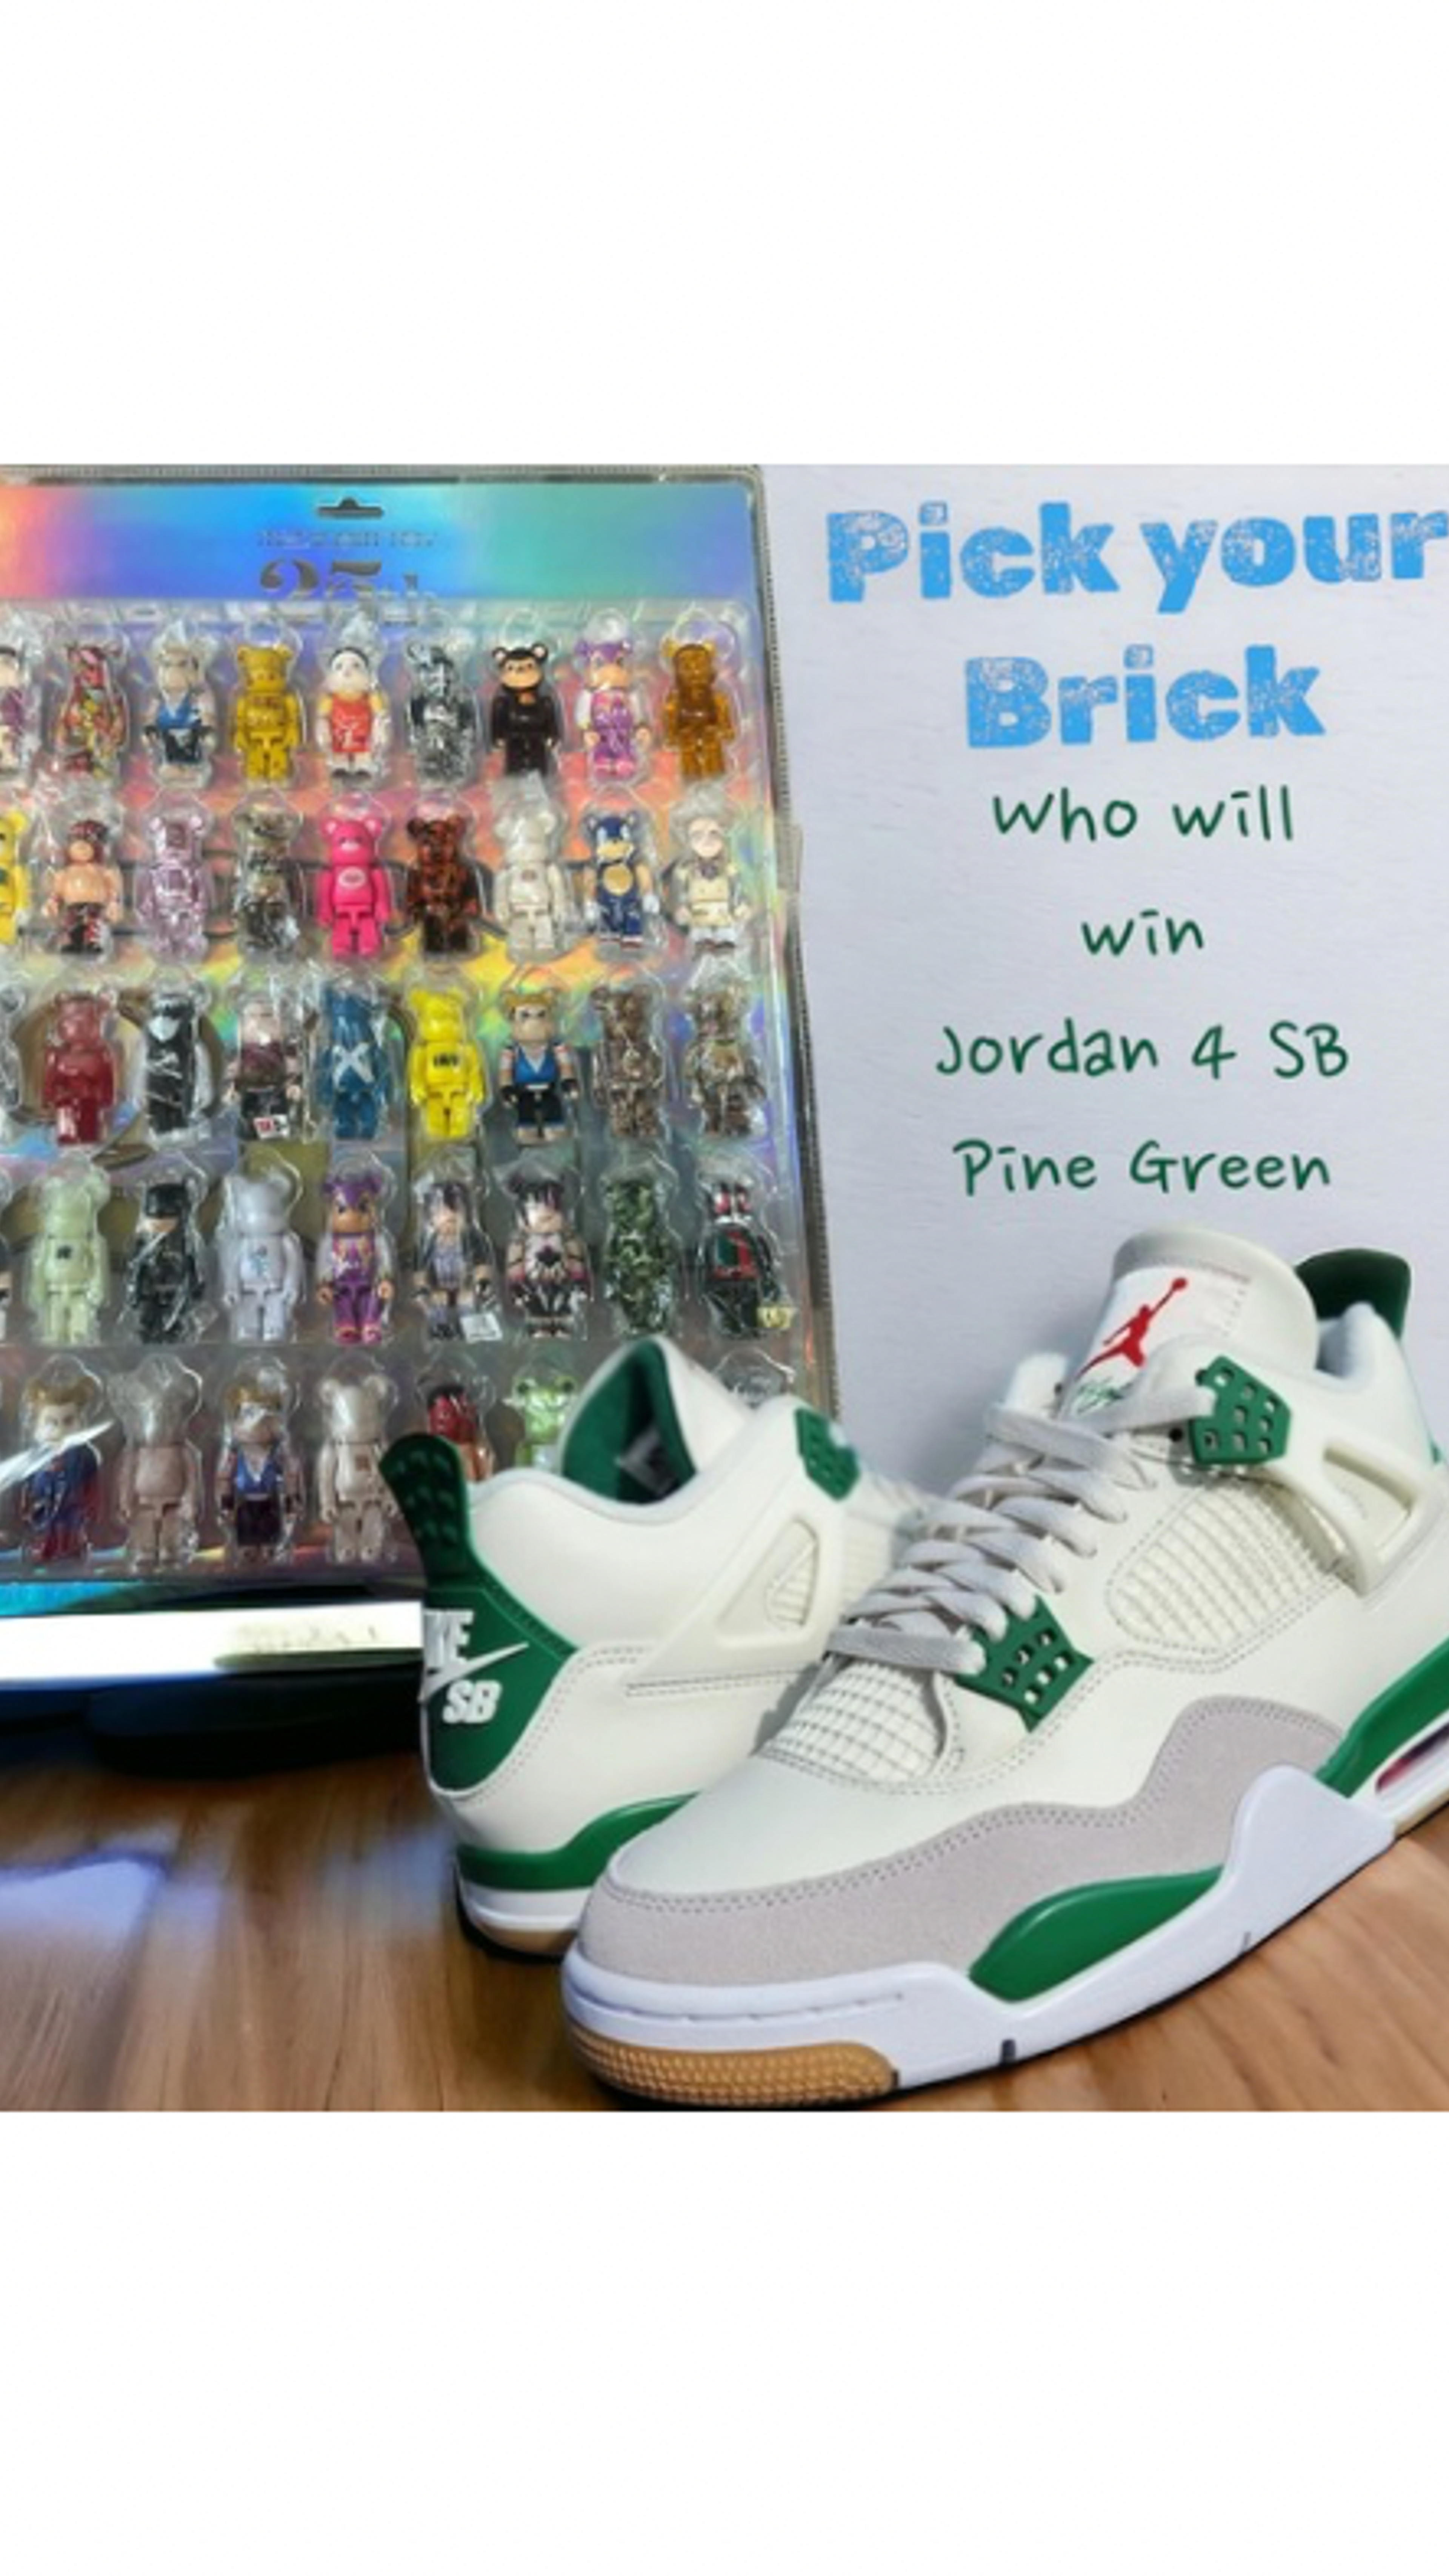 Preview image for the show titled "Pick Your Brick" at Today @ 9:30 PM